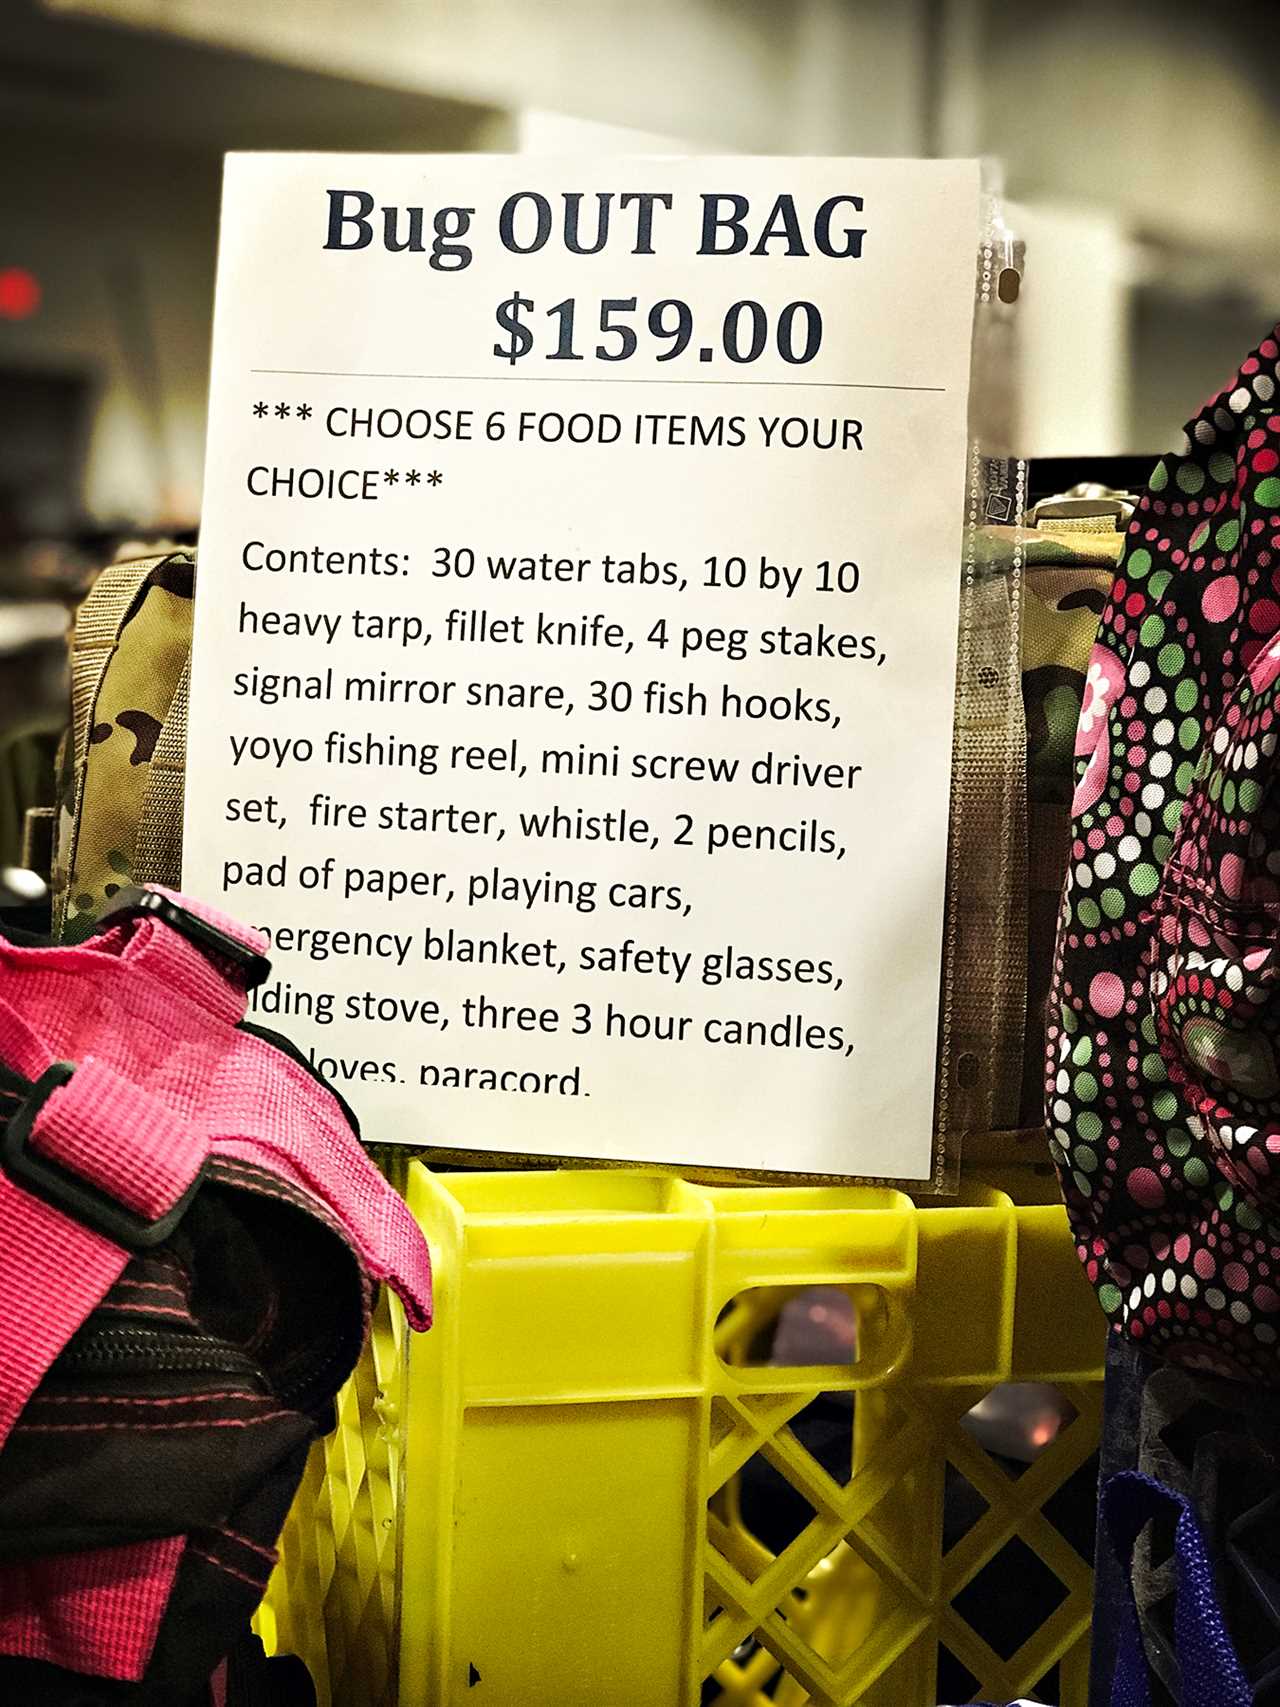 Bug-out-bags for sale in Louisville.